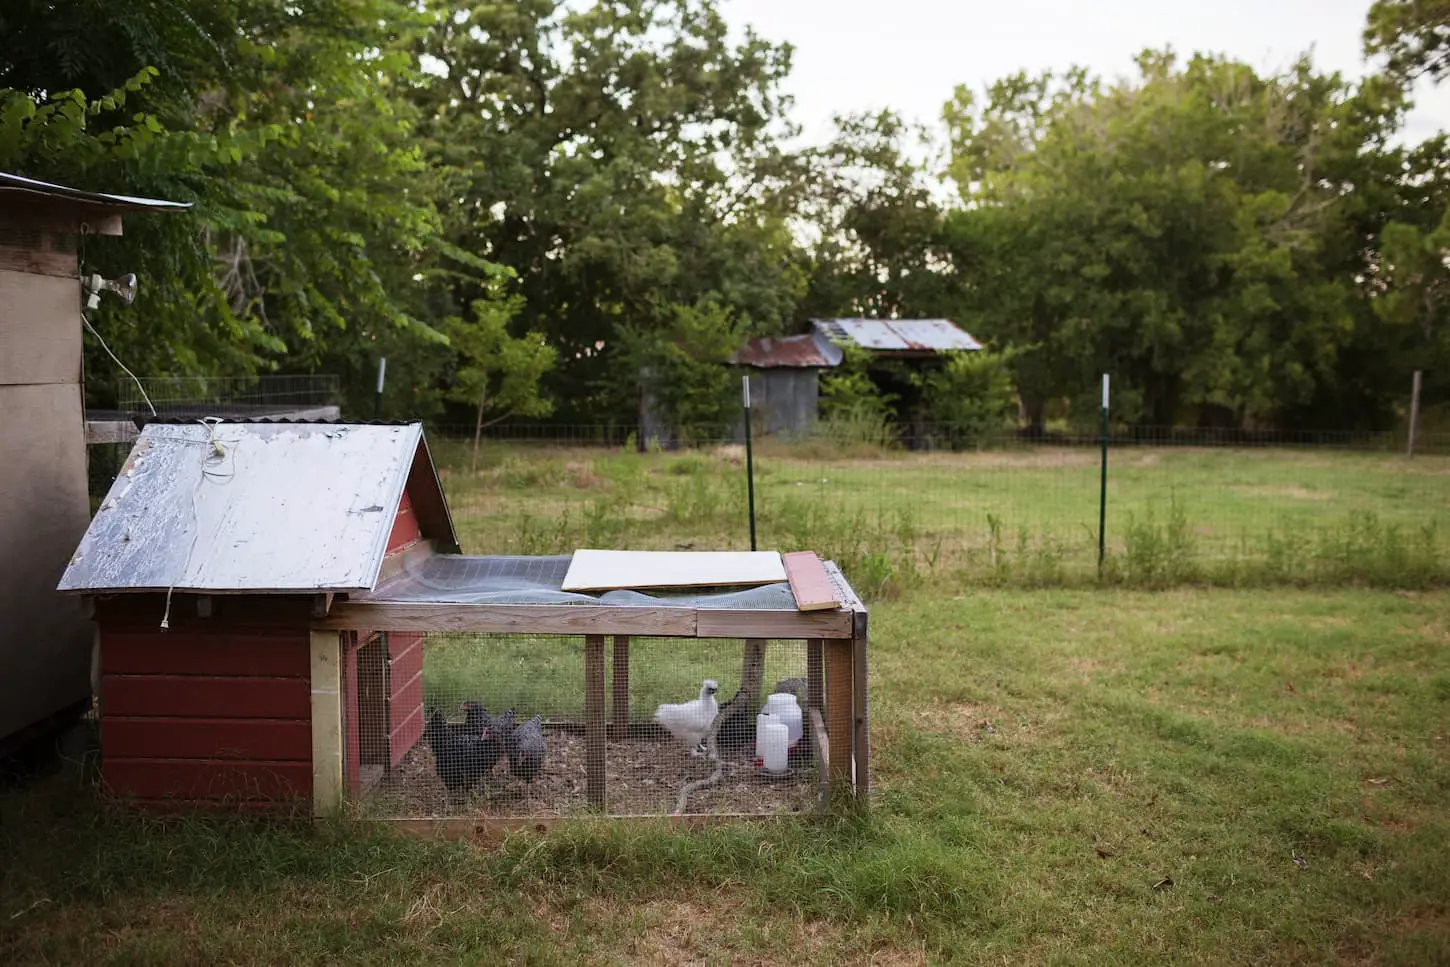 An image of chicken in coop on field.